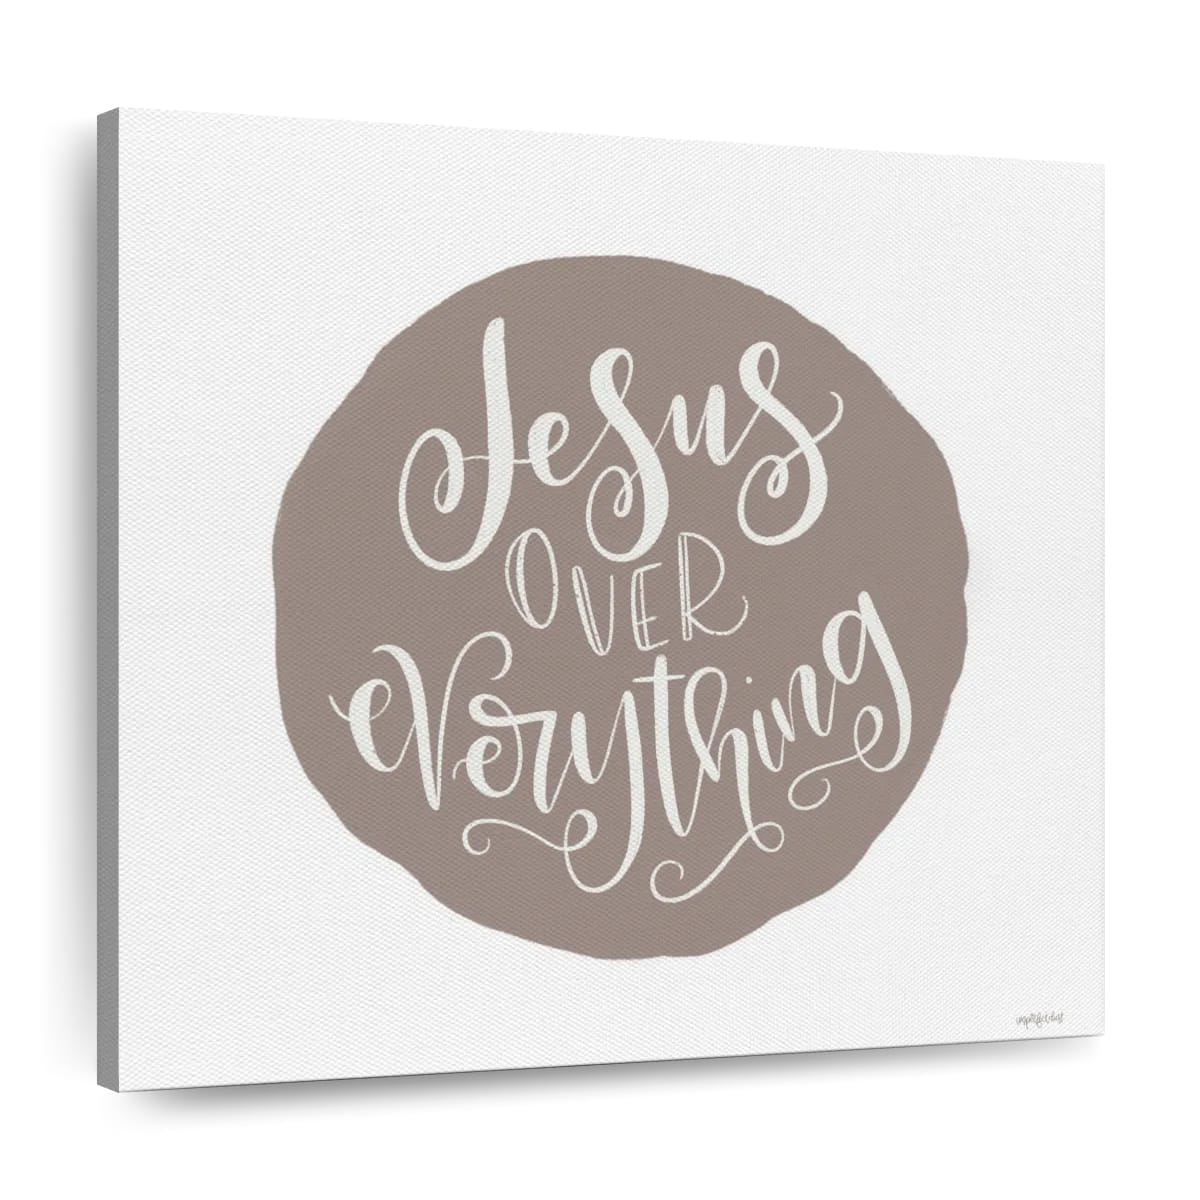 Jesus Over Everything Square Canvas Art - Christian Wall Decor - Christian Wall Hanging